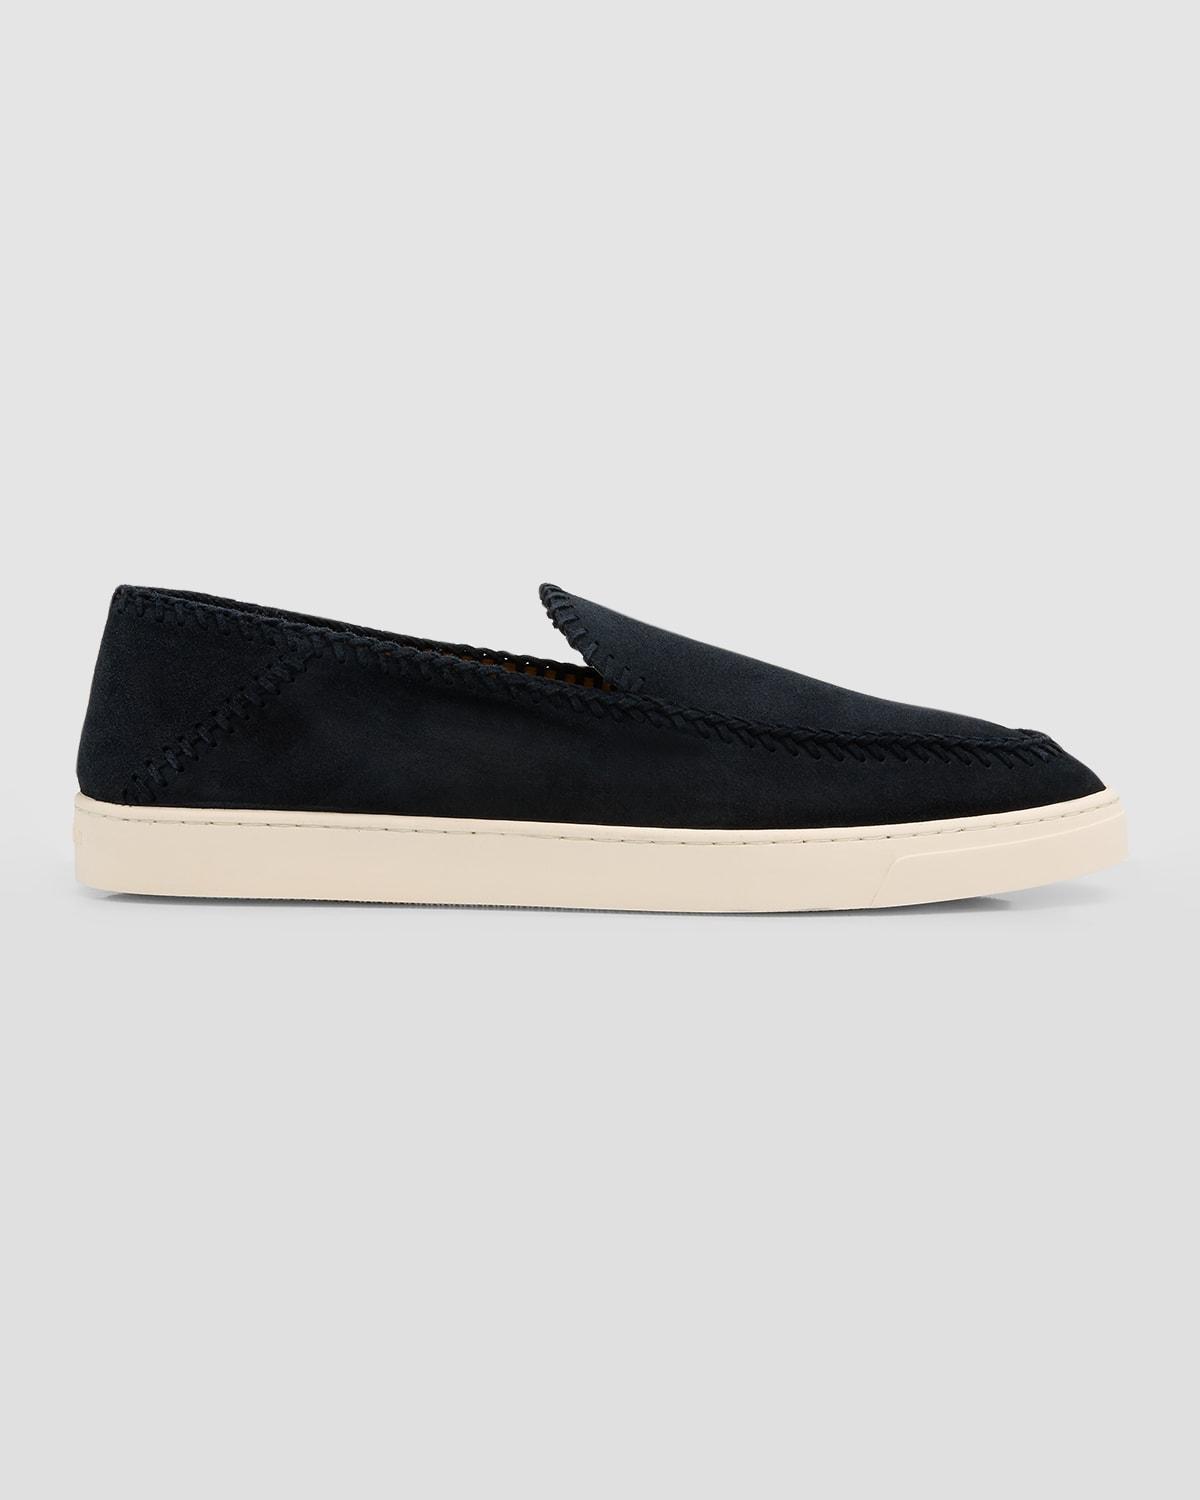 Mens Suede Sneaker-Sole Loafers Product Image